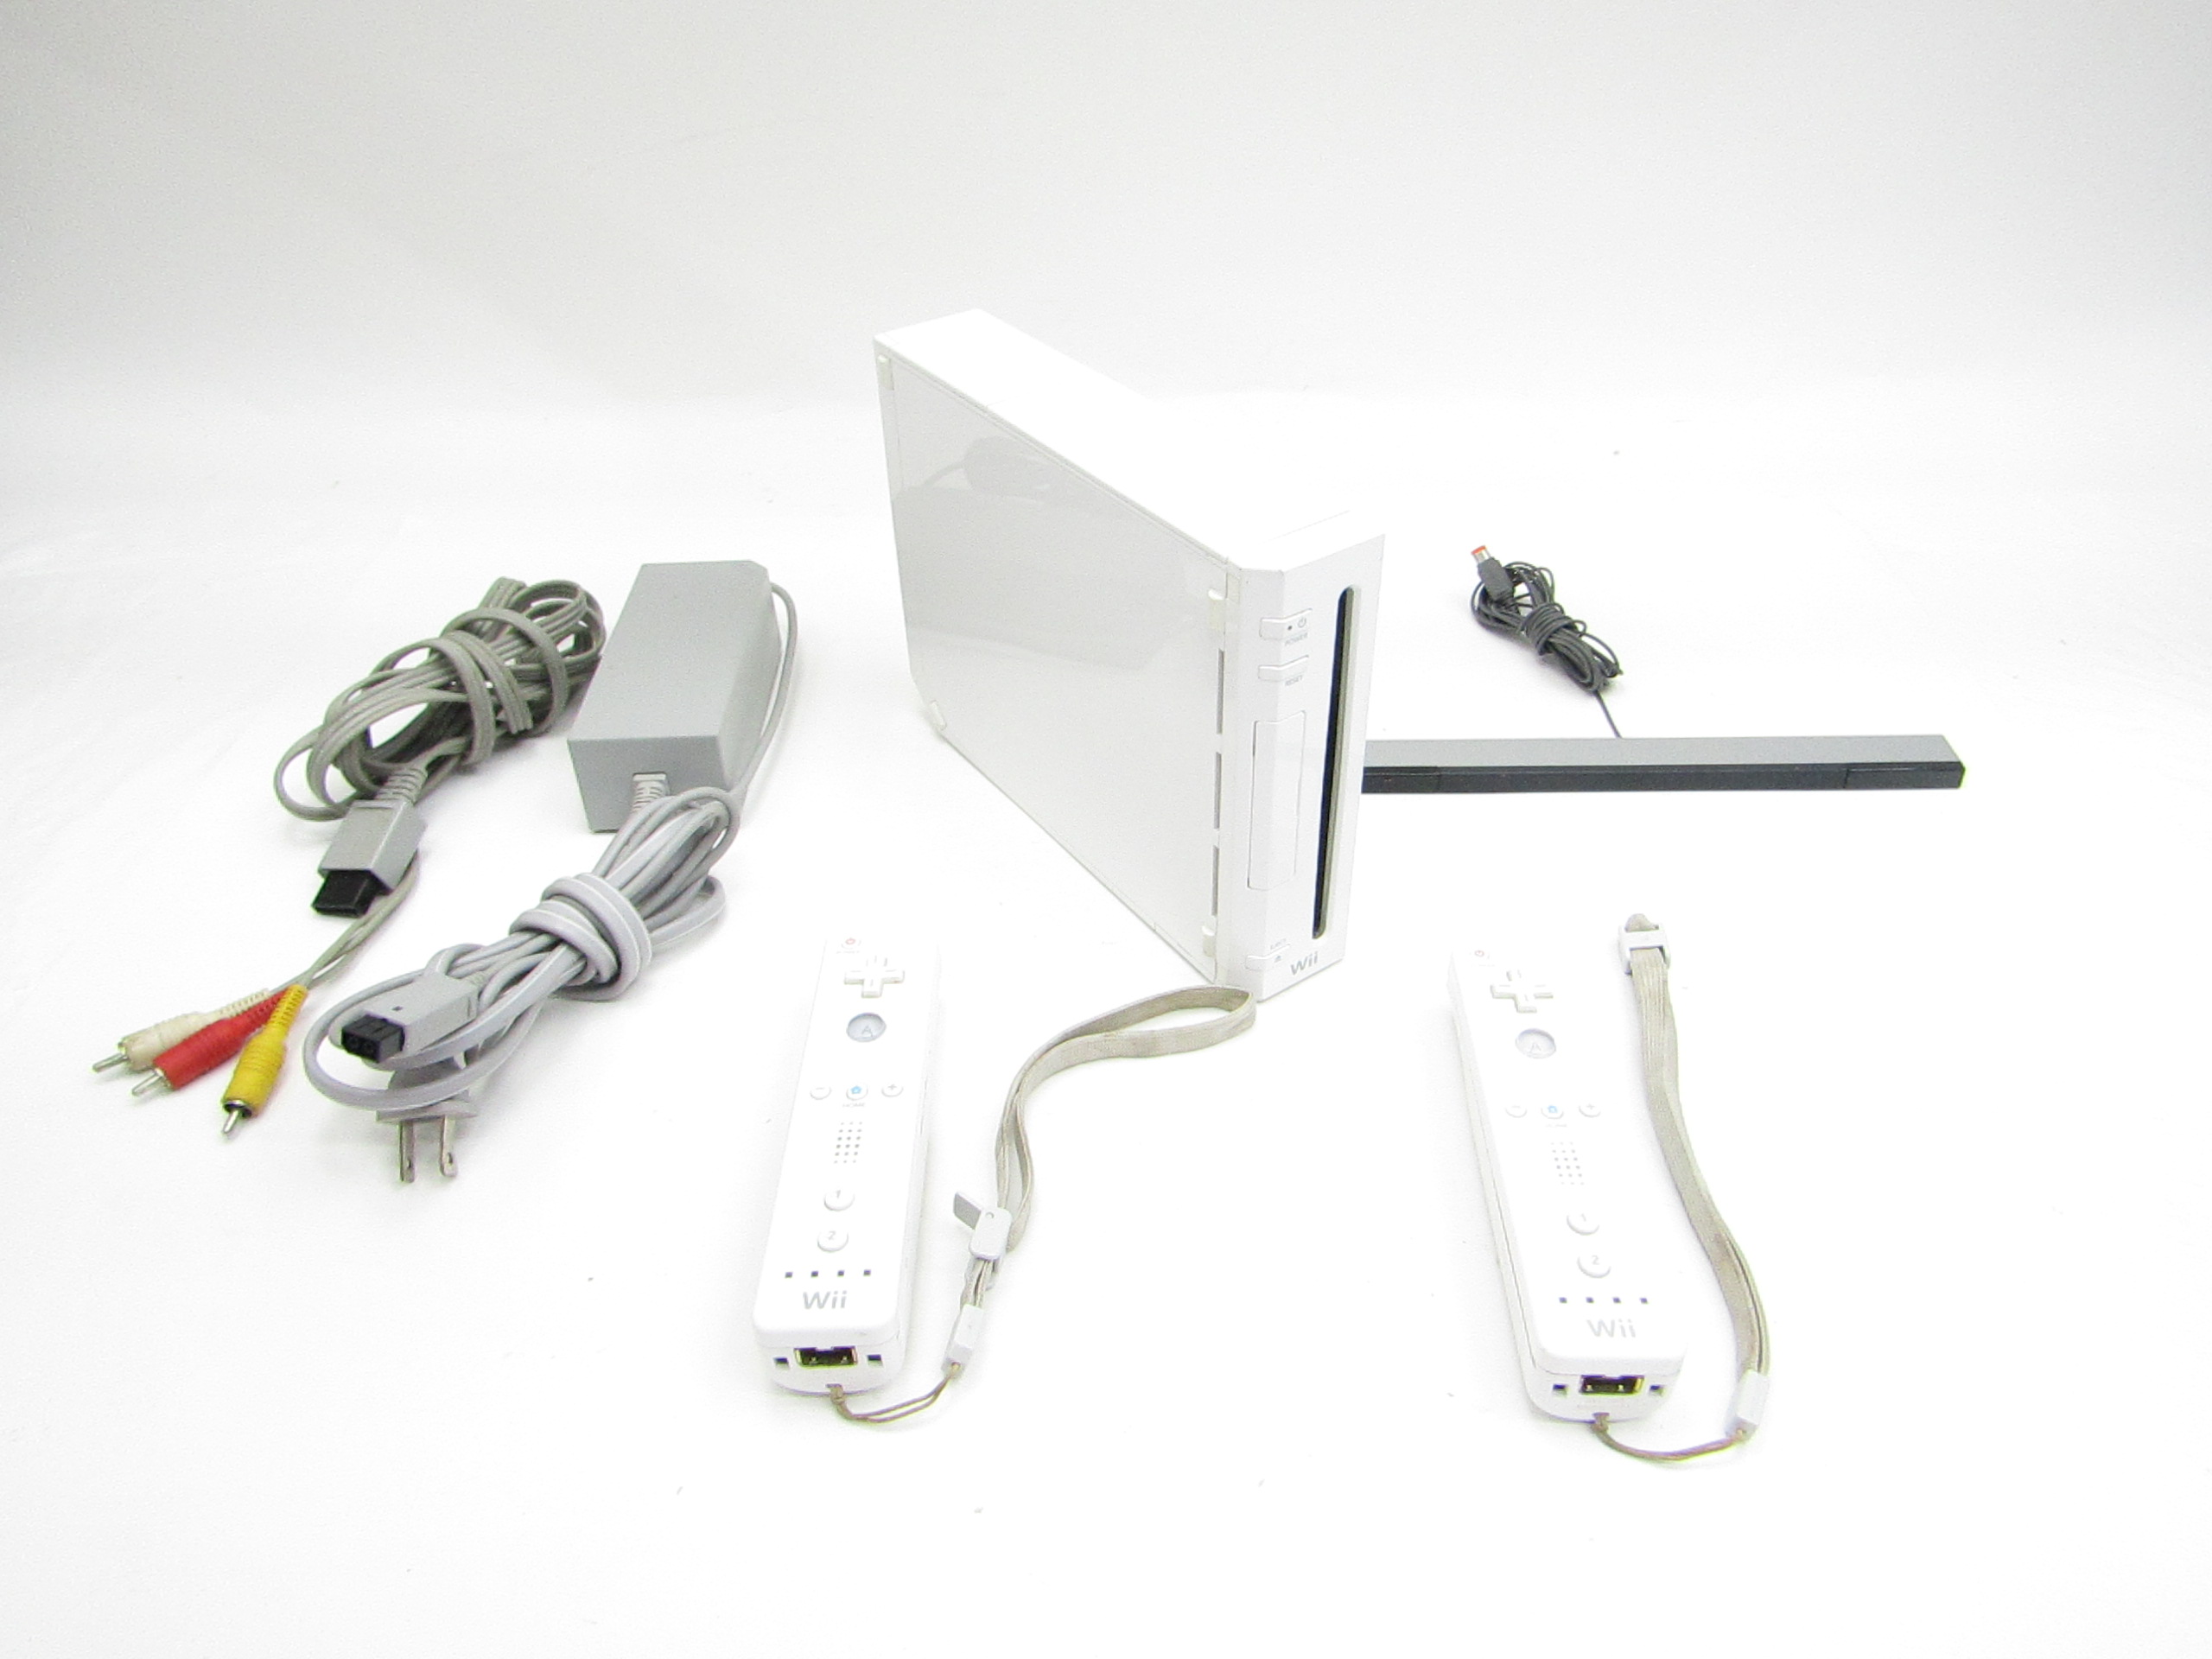 Wii RVL-001(USA) 512MB Home Gaming Console